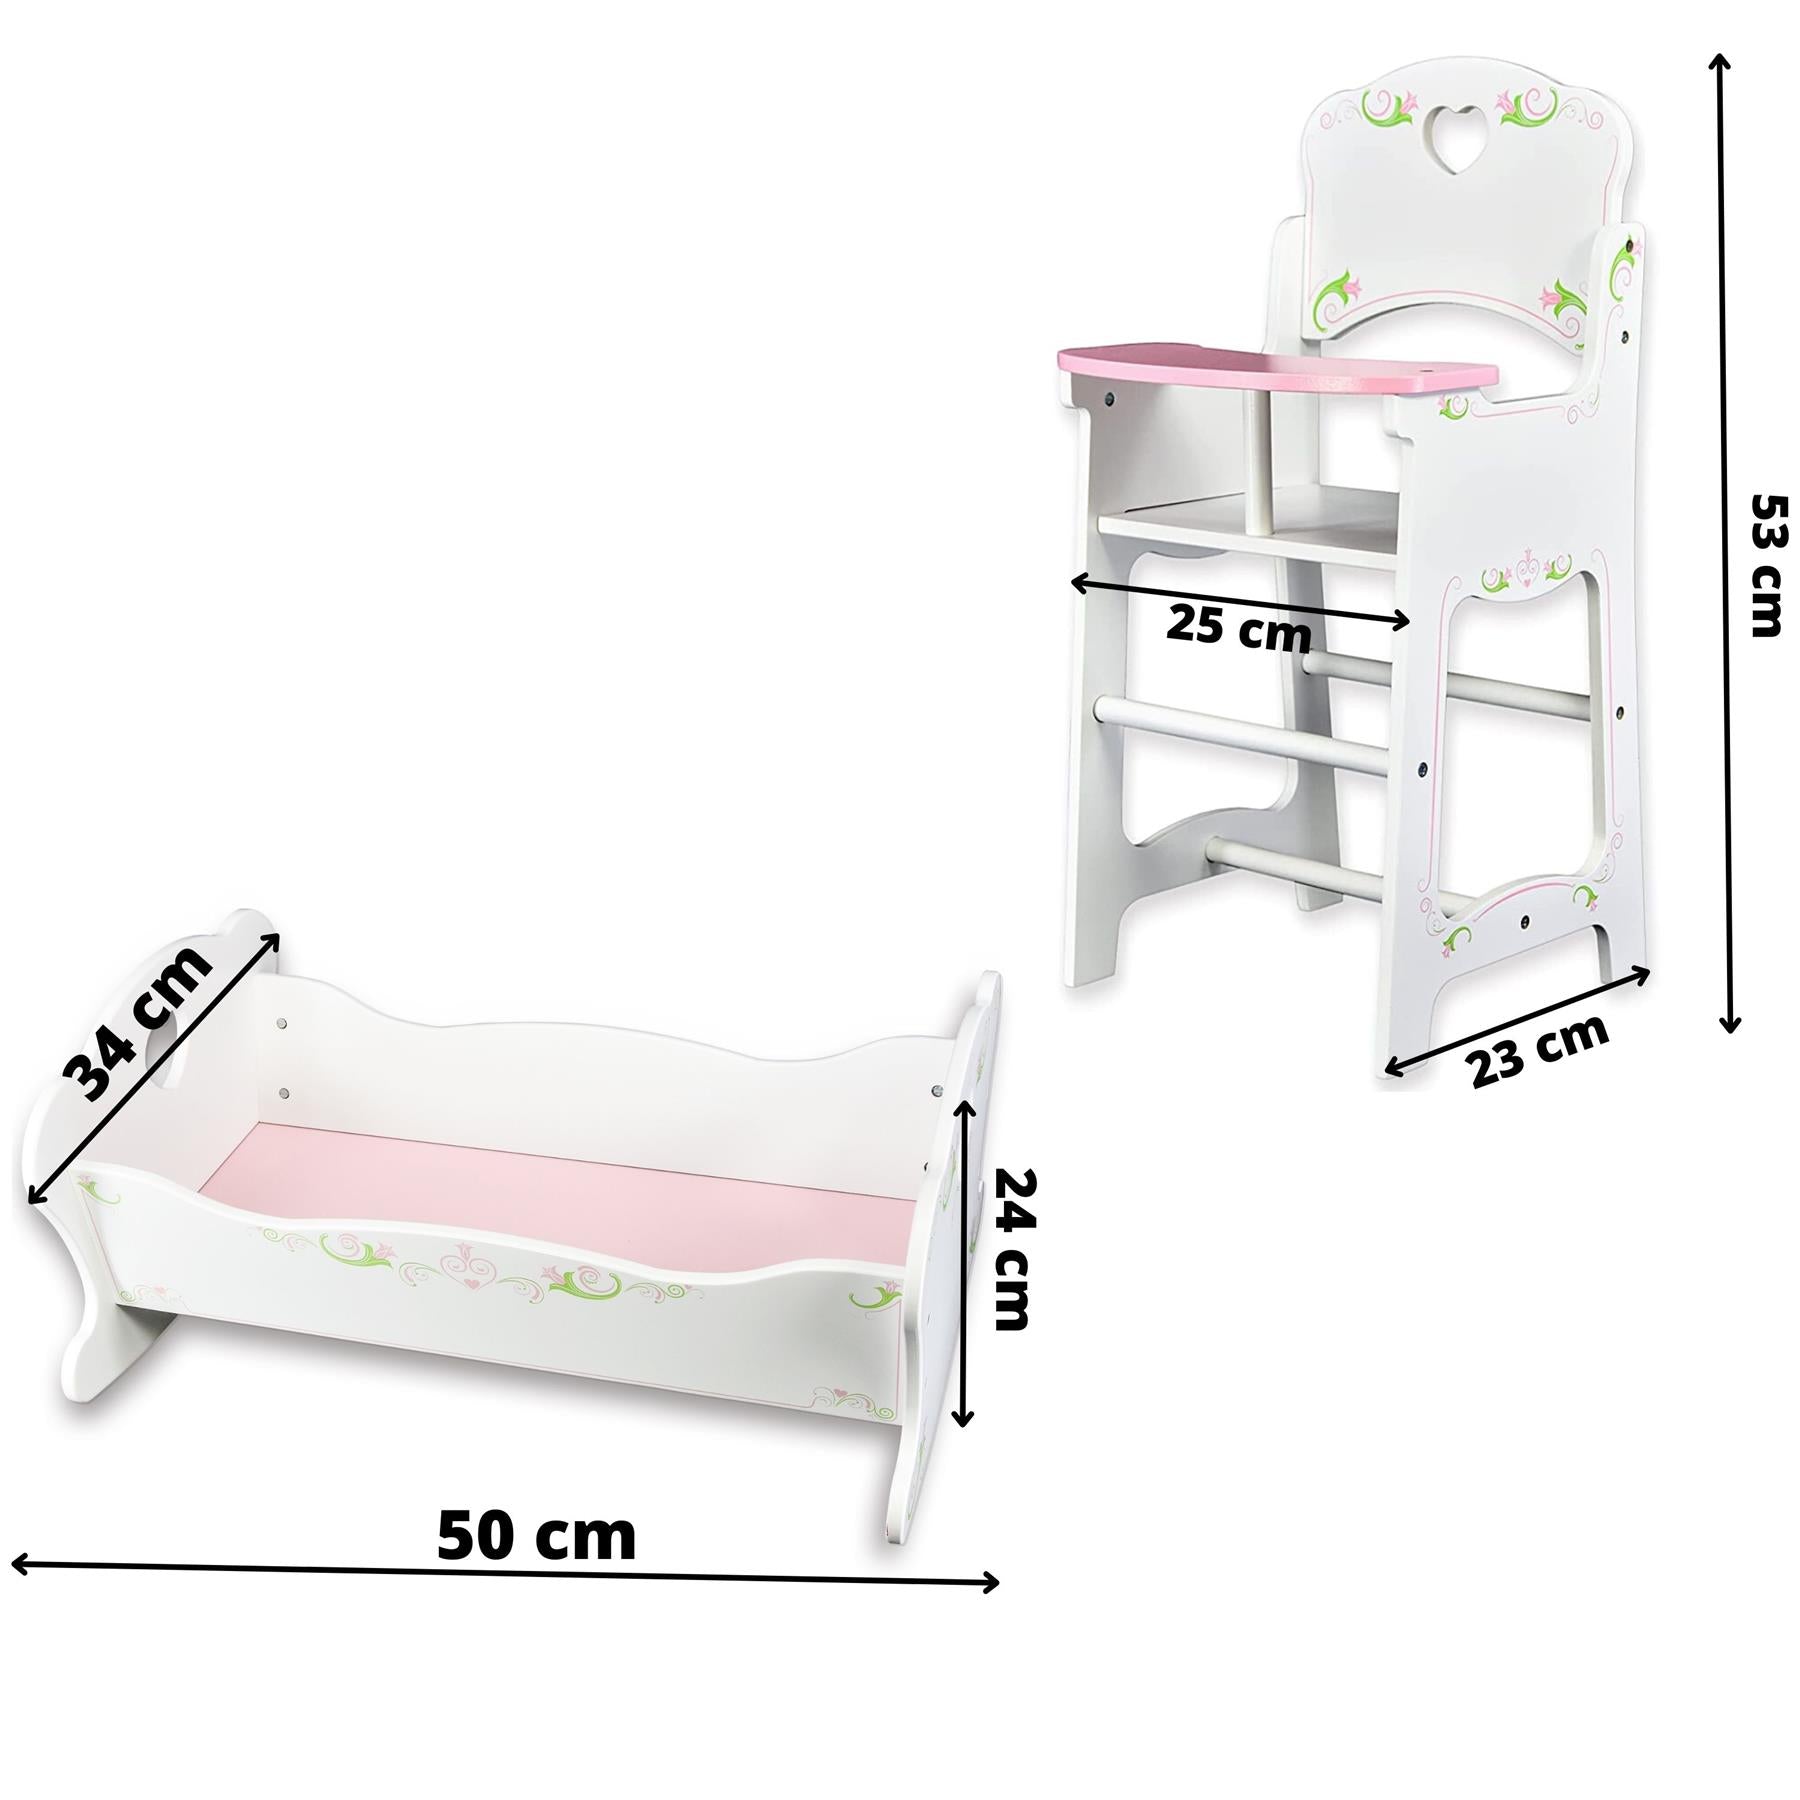 BiBi Doll Baby Doll Accessory Baby Dolls Wooden High Chair and Cradle Furniture